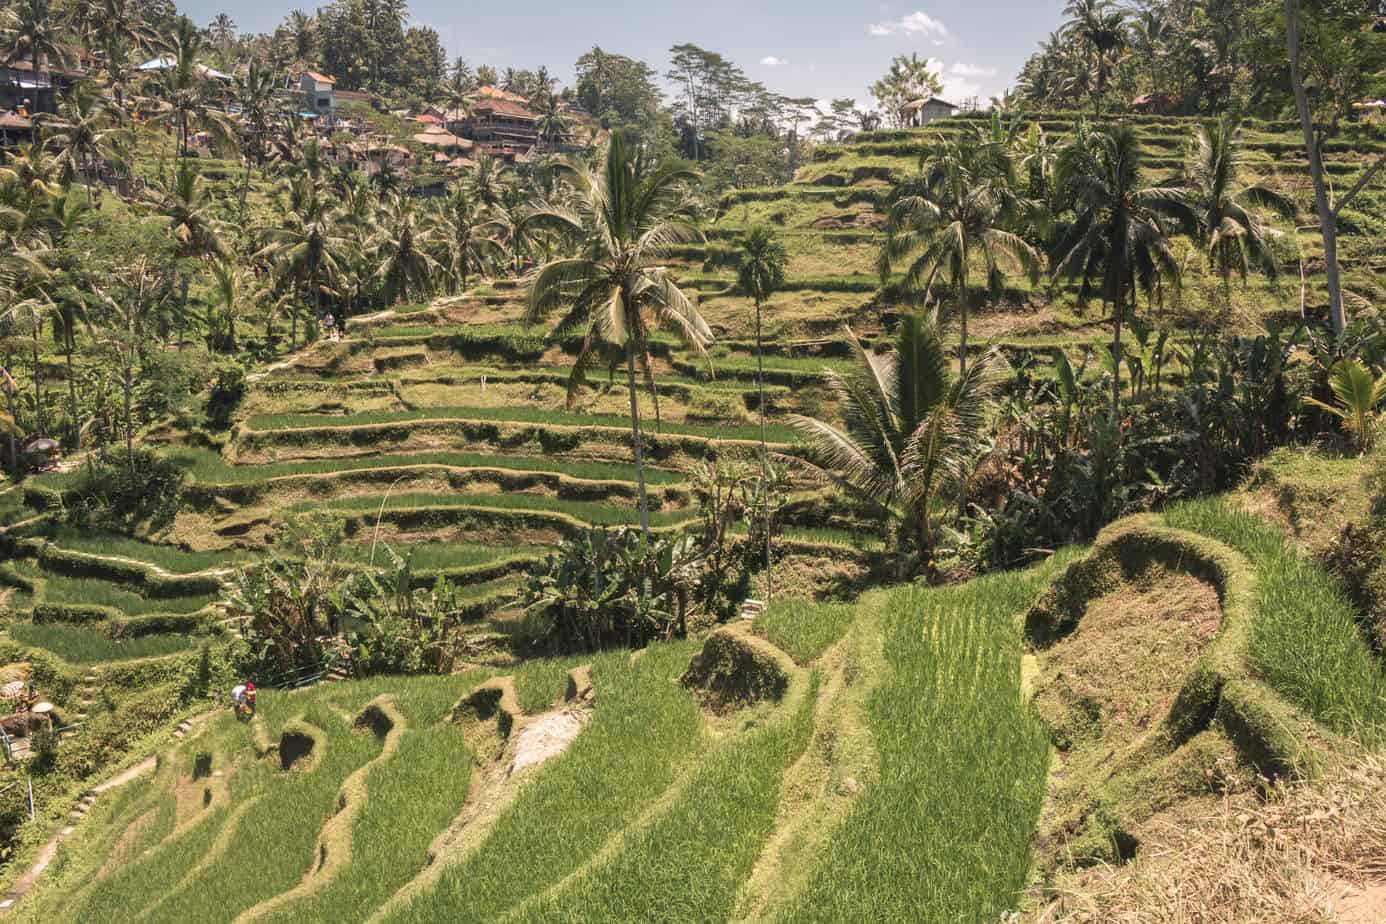 A Months Budget Travel Breakdown For Bali – It doesn’t Have To Be Expensive!